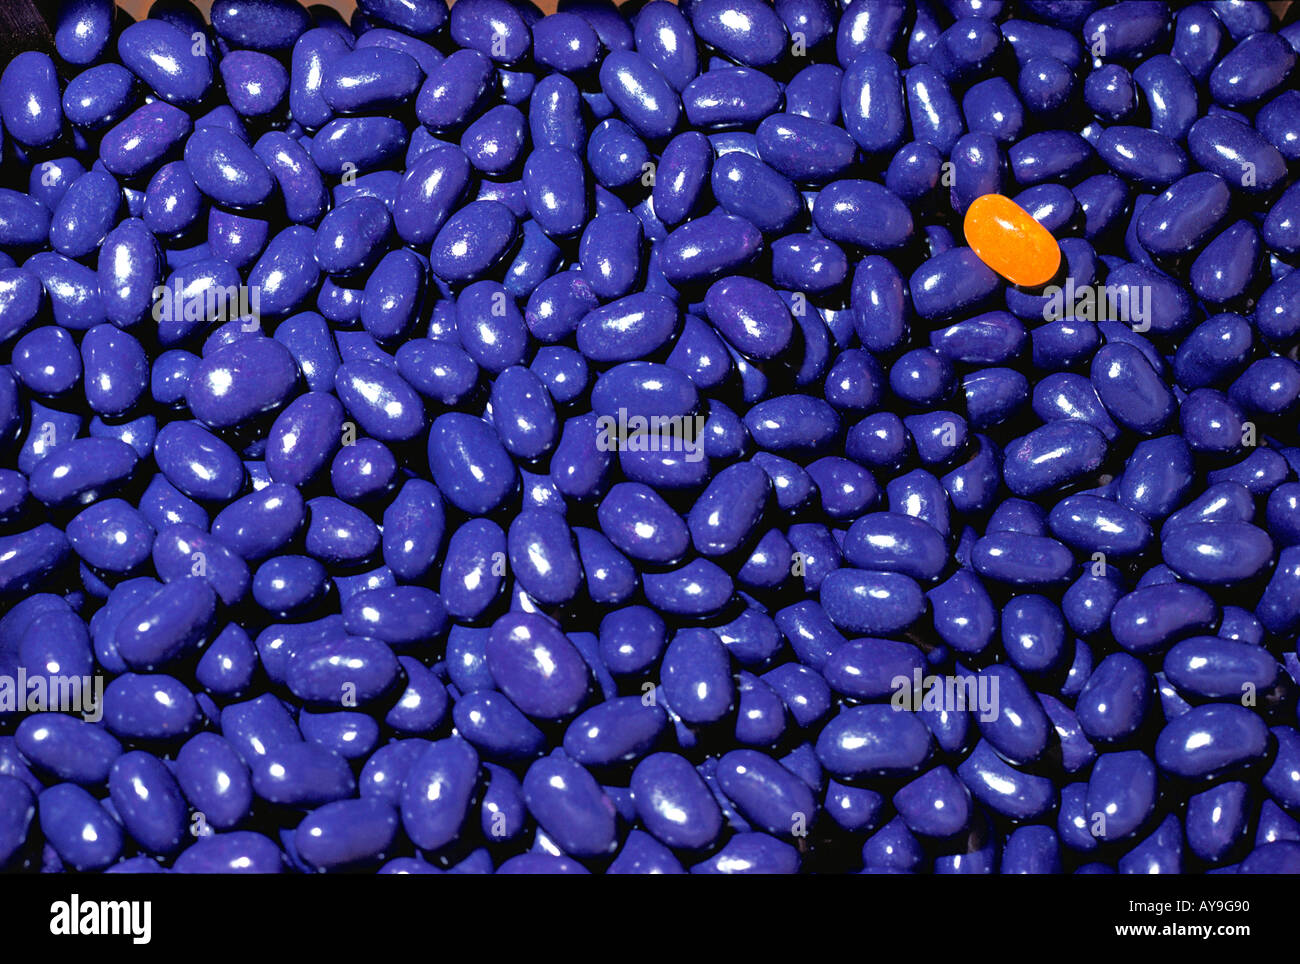 Close up of blue jellybeans with one yellow jellybean makes a striking pattern Stock Photo